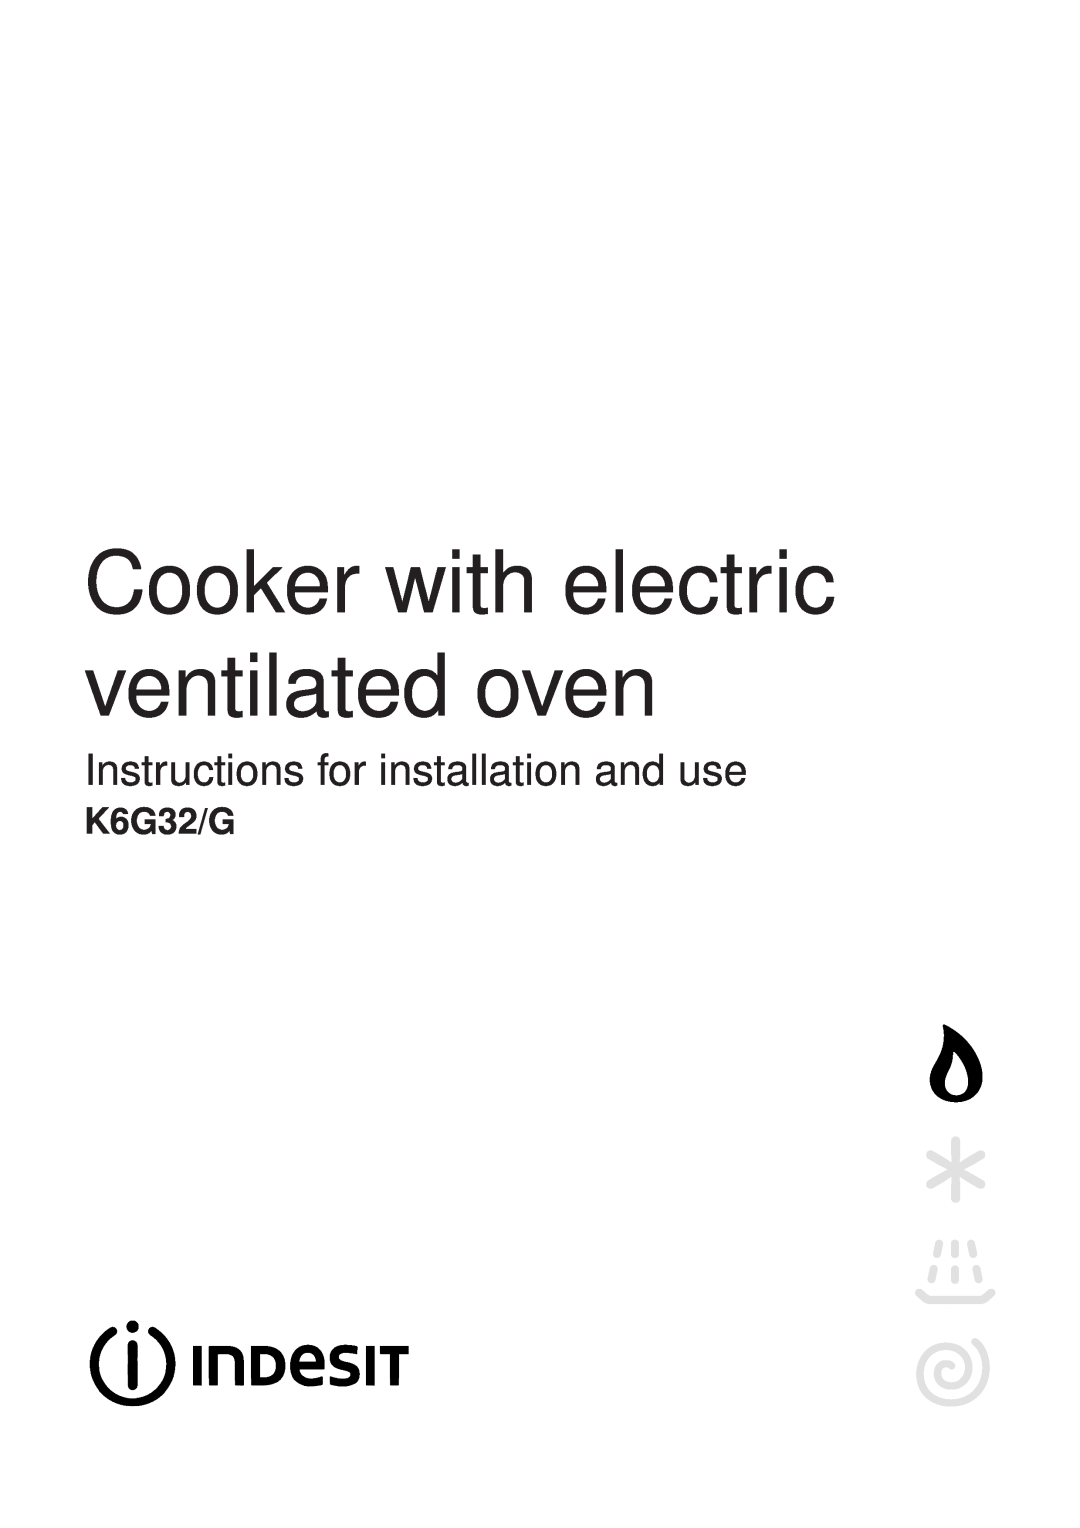 Indesit K6G32/G manual Cooker with electric ventilated oven, Instructions for installation and use 